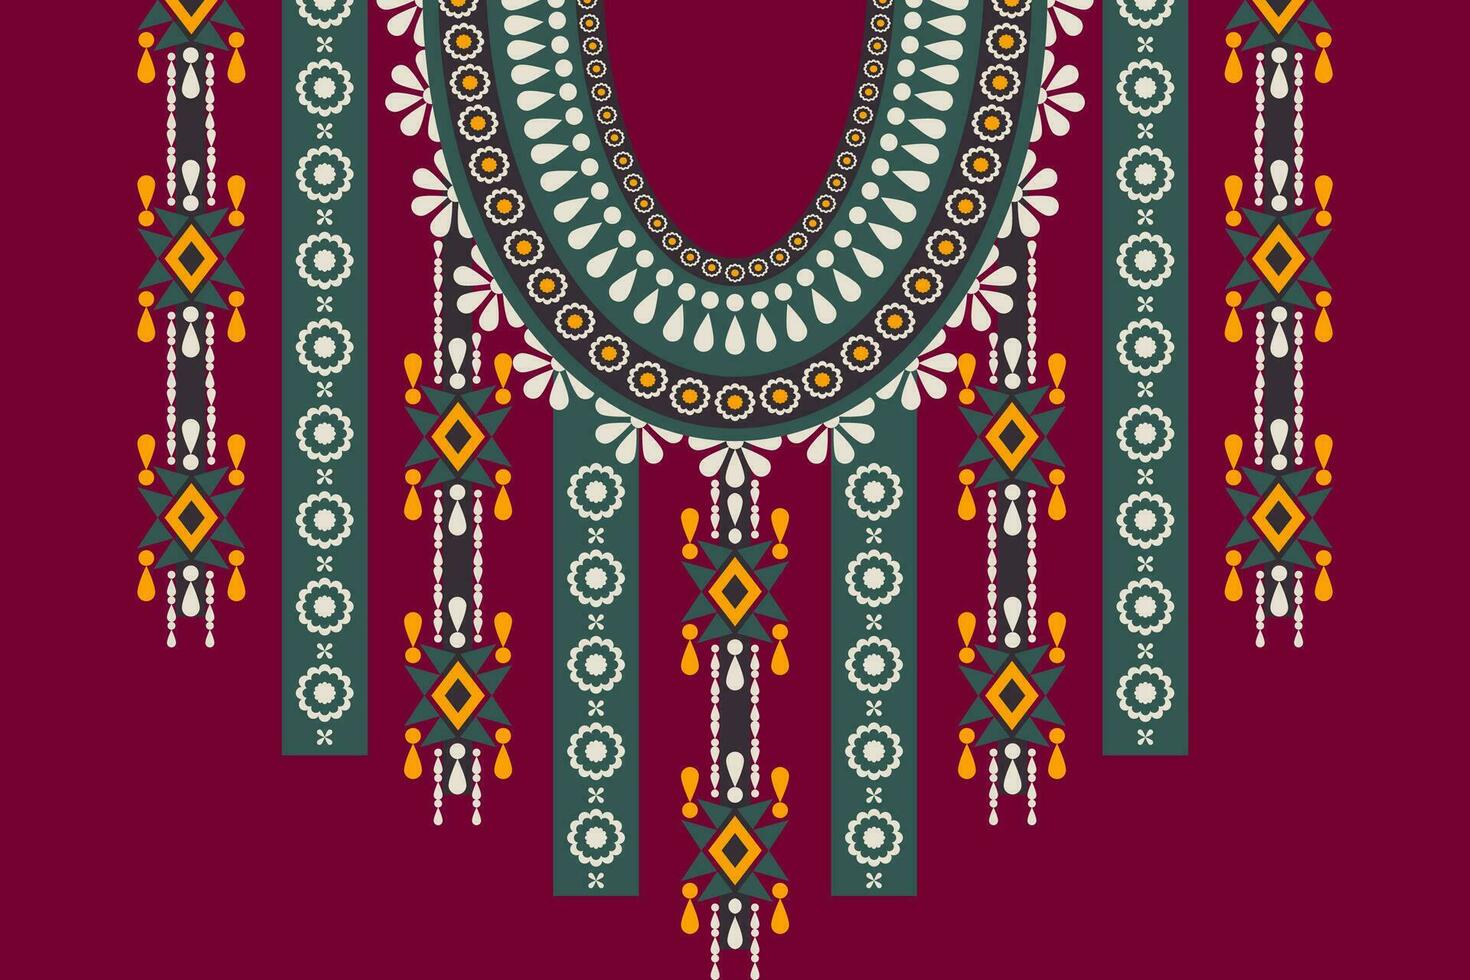 Ethnic tribal African geometric neckline colorful pattern. African tribal art shirts fashion. Ethnic neck embroidery ornaments. Traditional African clothing design. Ethnic neckline pattern. vector